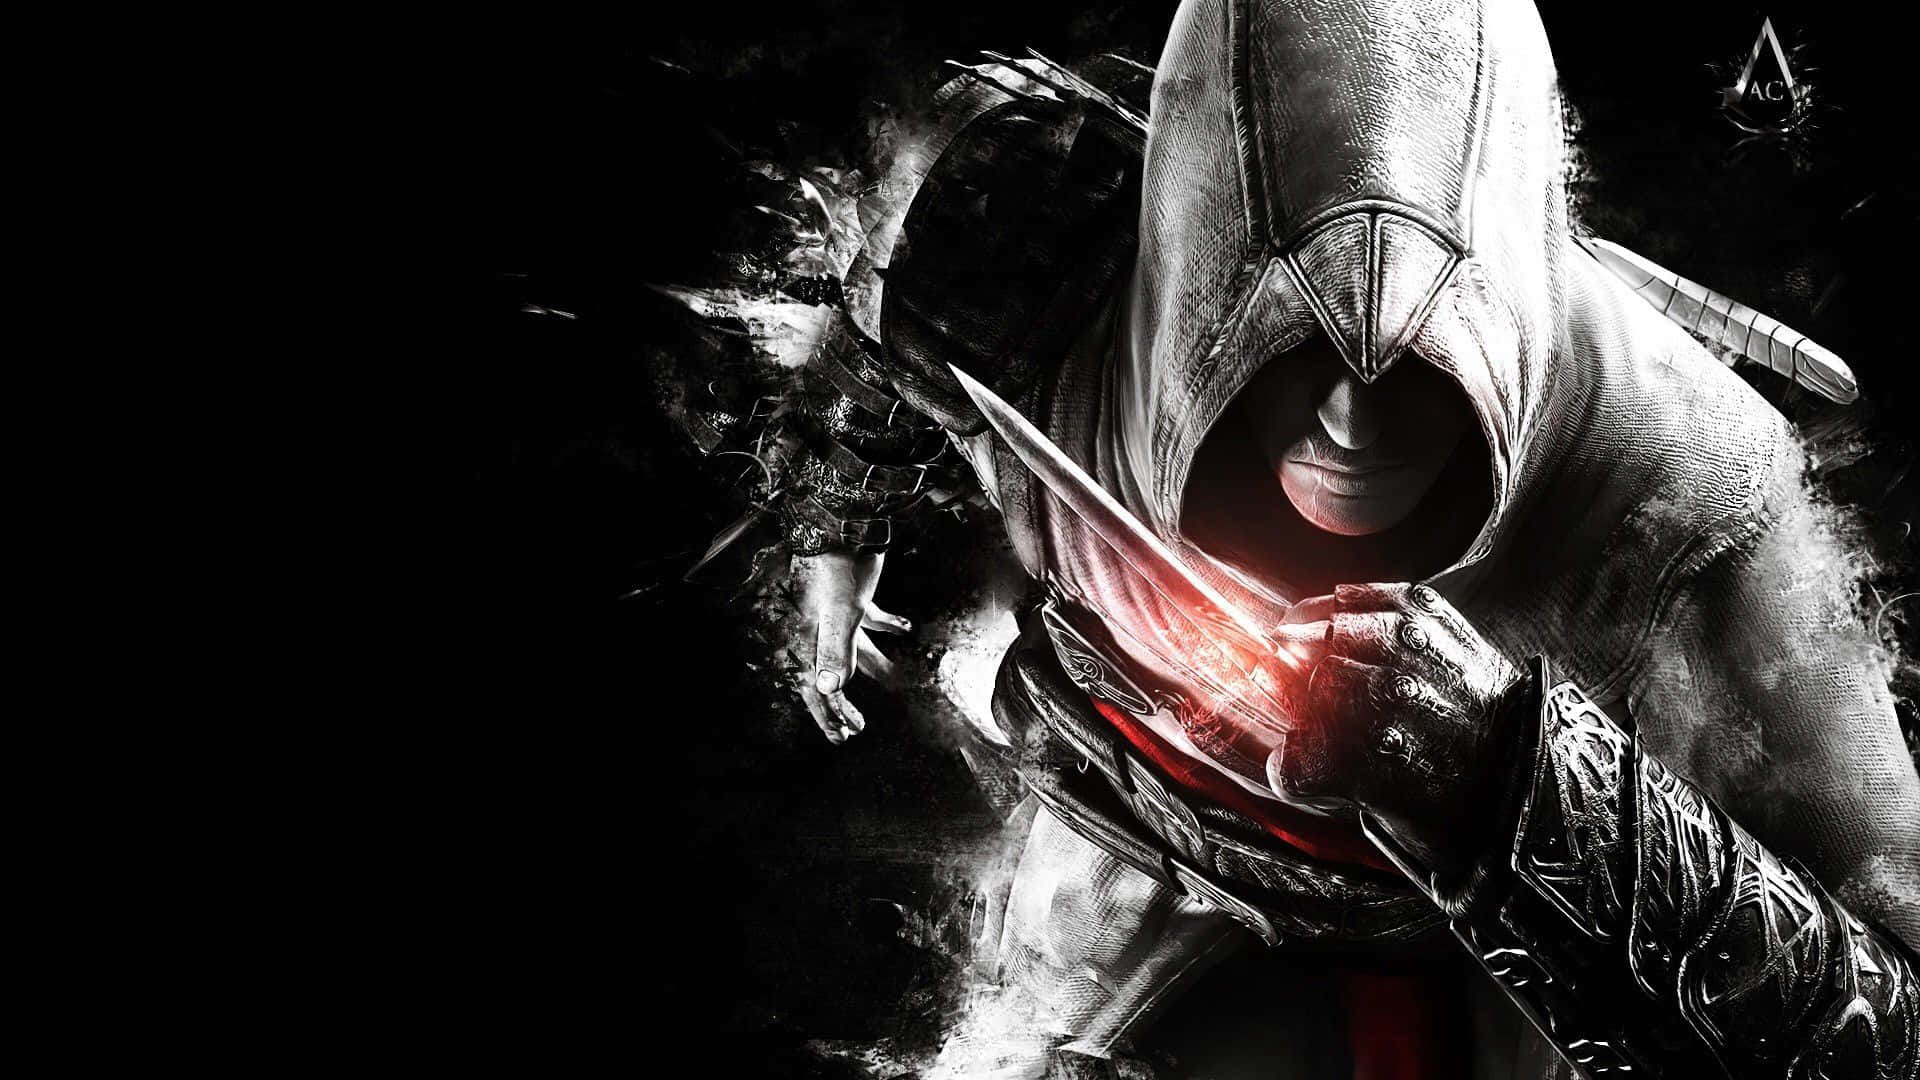 Altair, the fearless Assassin from Assassin's Creed, in an epic action pose Wallpaper